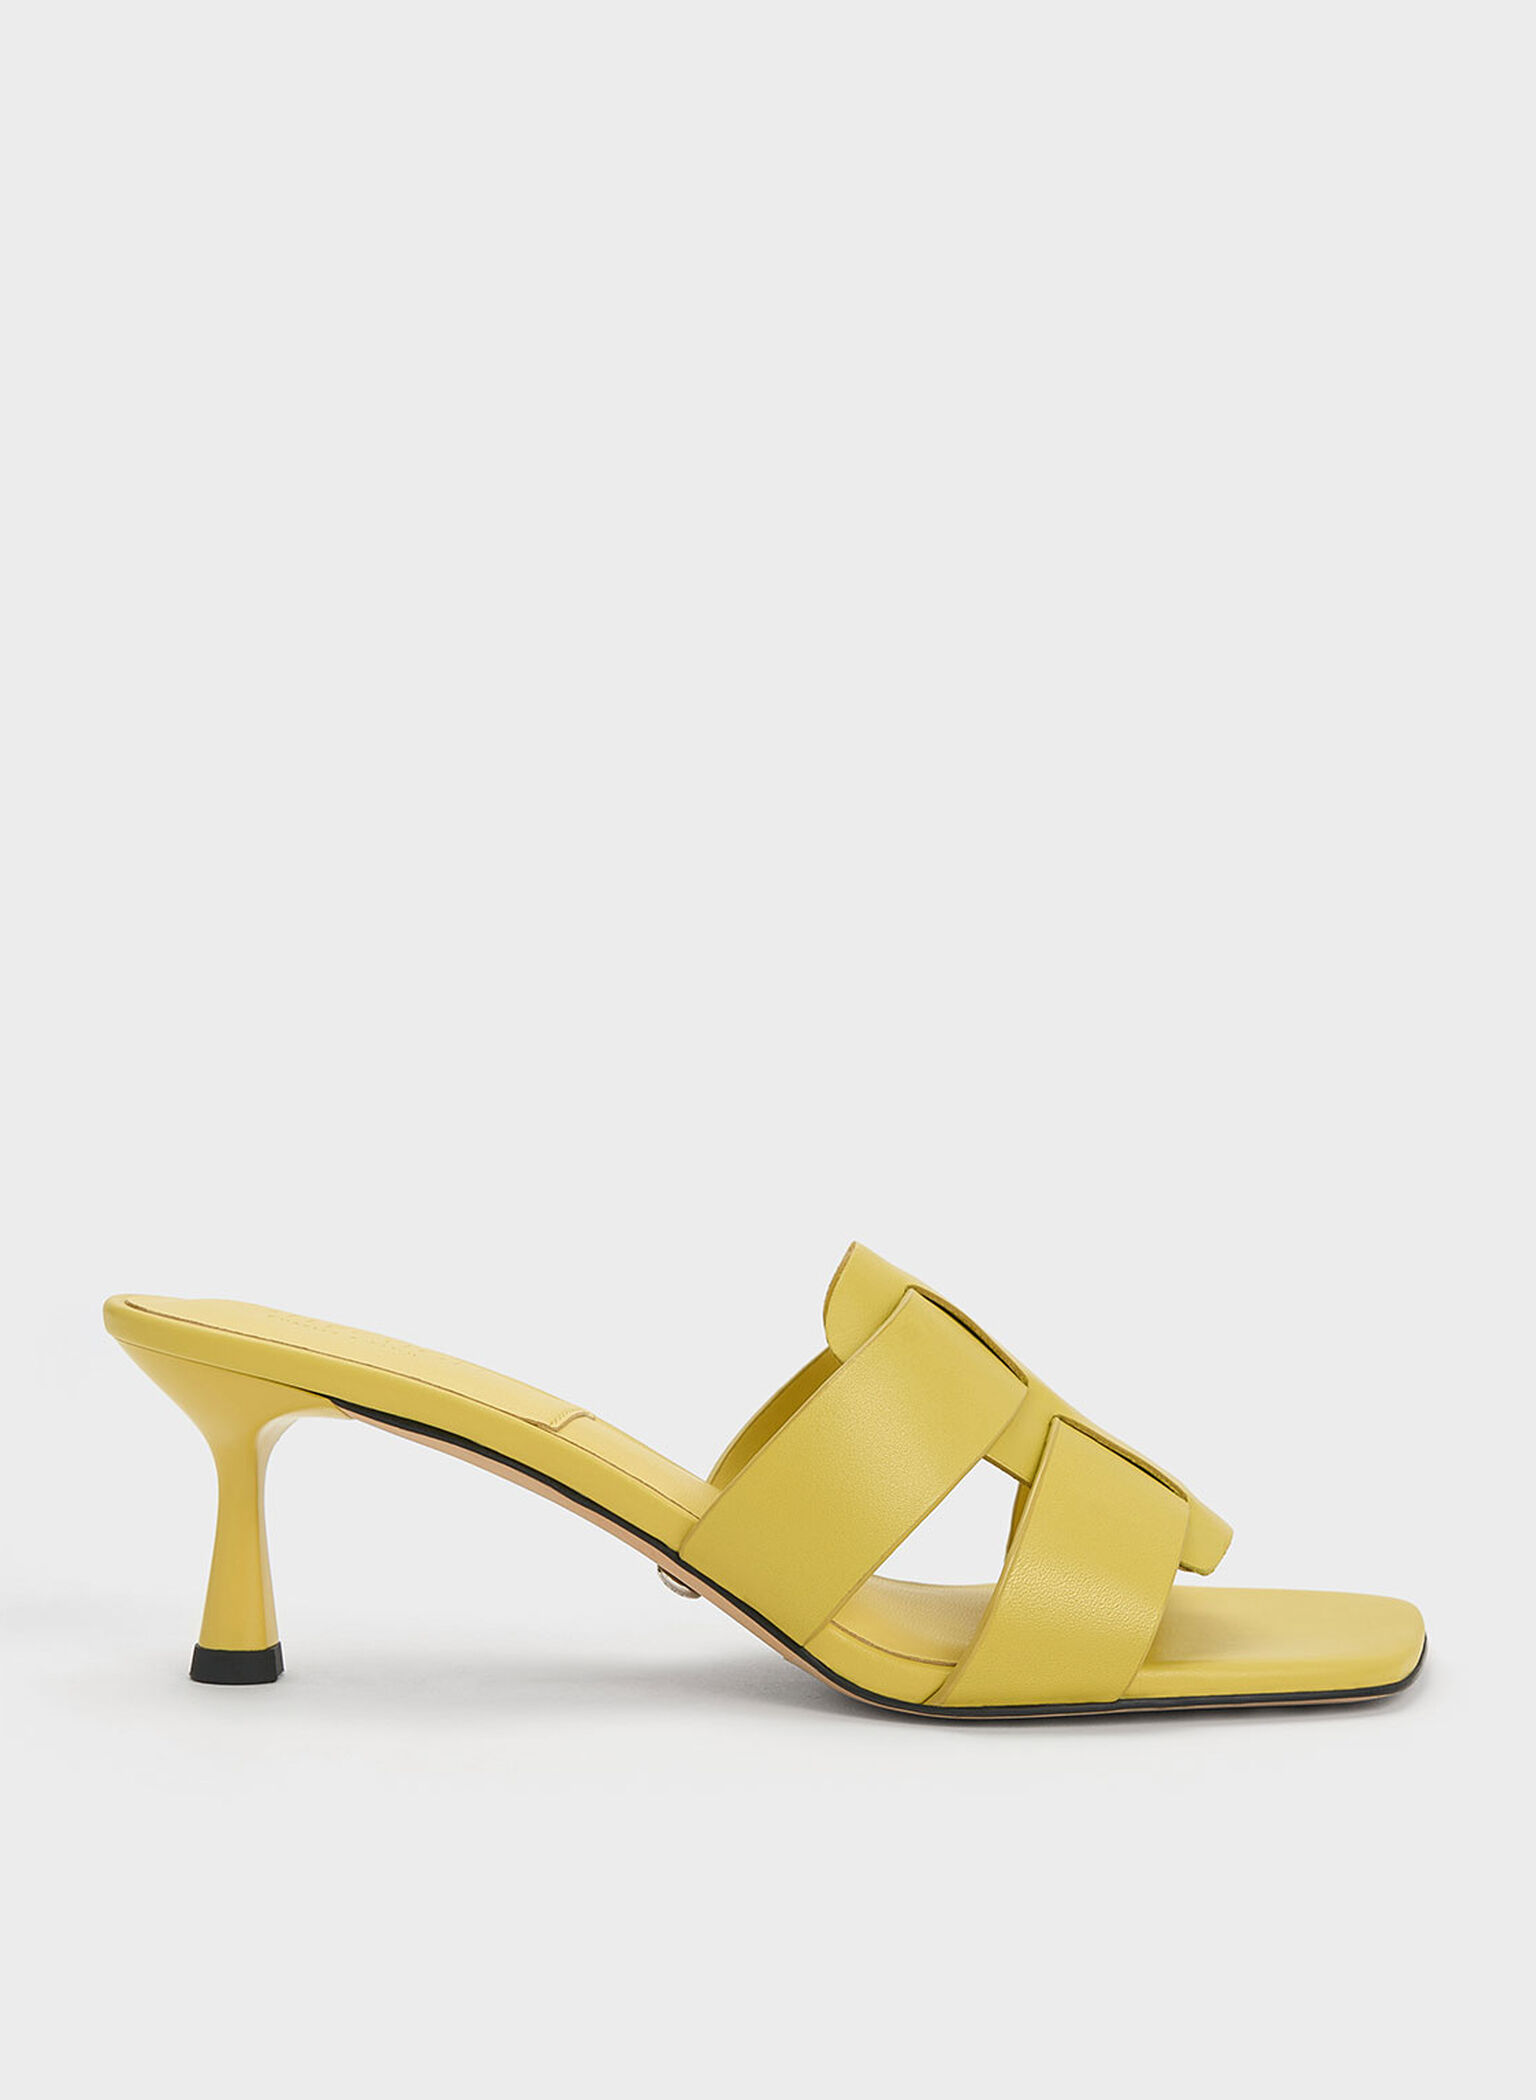 Trichelle Interwoven Leather Spool Heel Mules, Yellow, hi-res